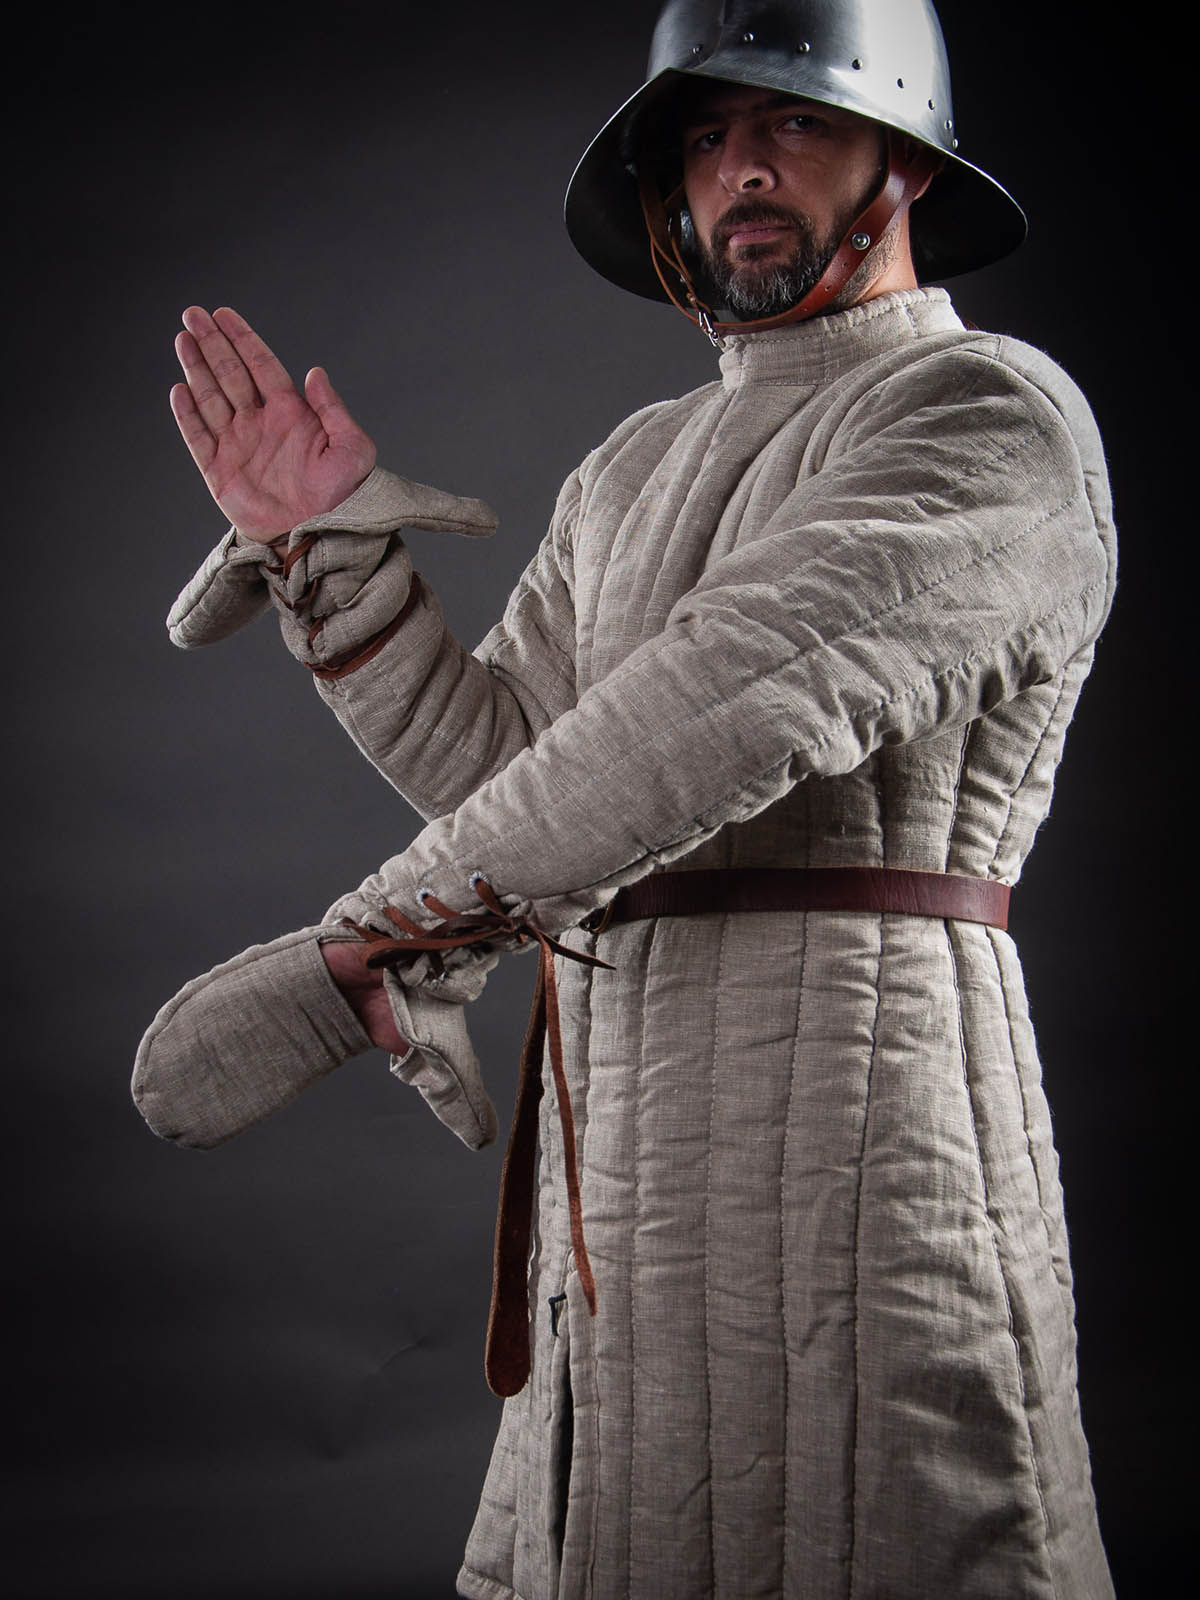 Medieval gambeson with mittens - new photos!